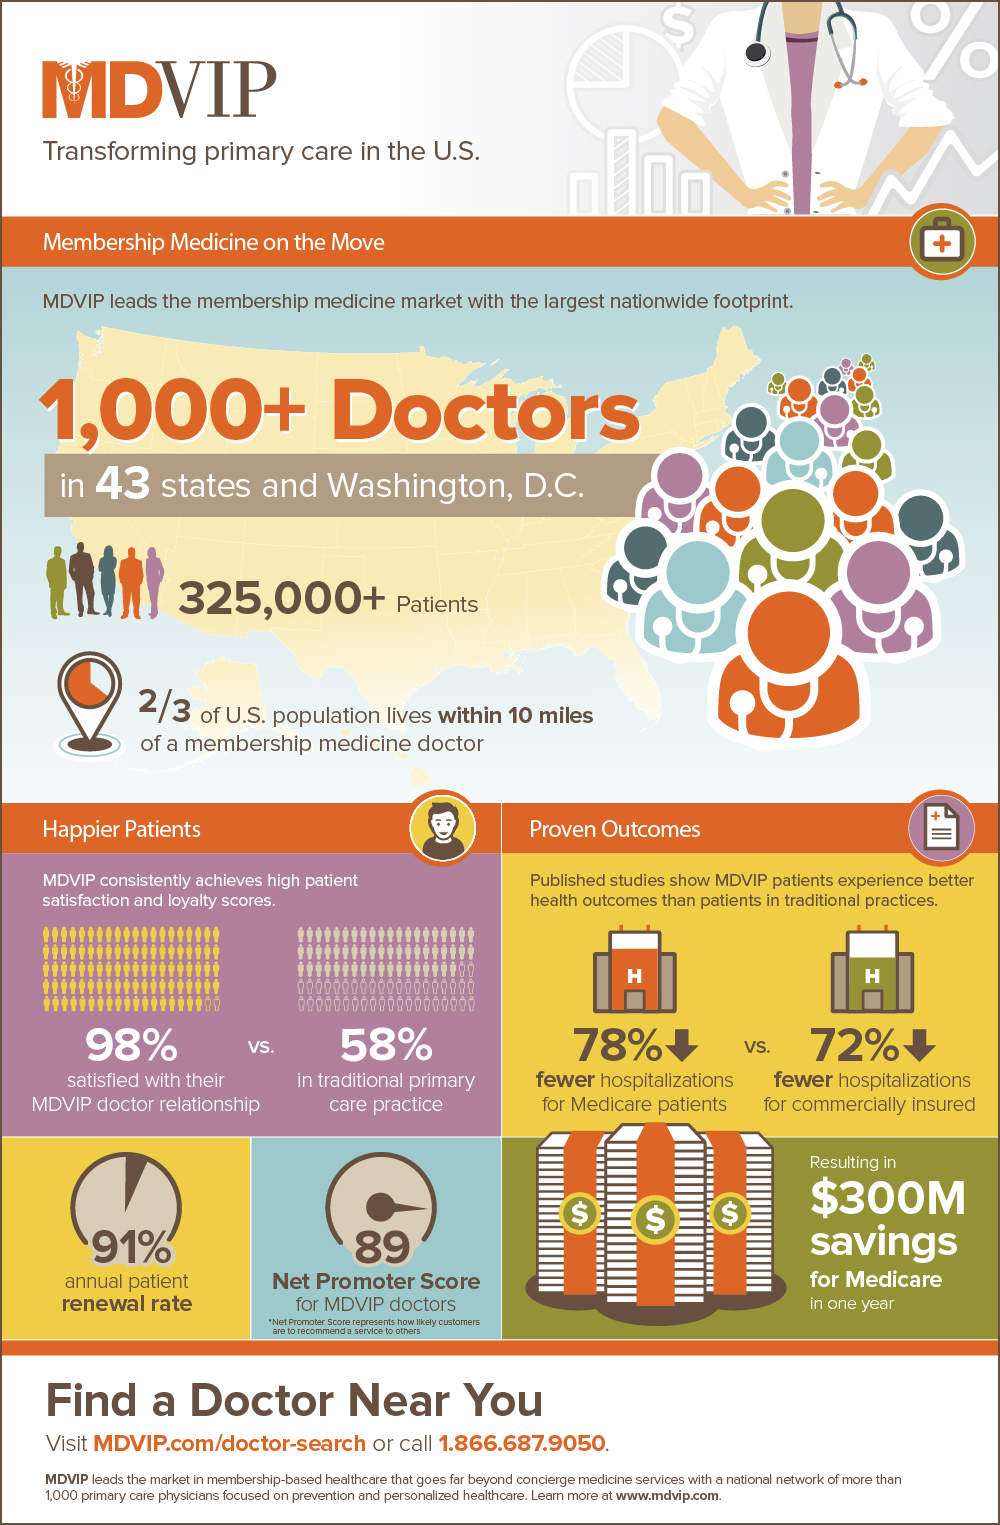 MDVIP has a network of 1,000 primary care doctors in 43 states. 